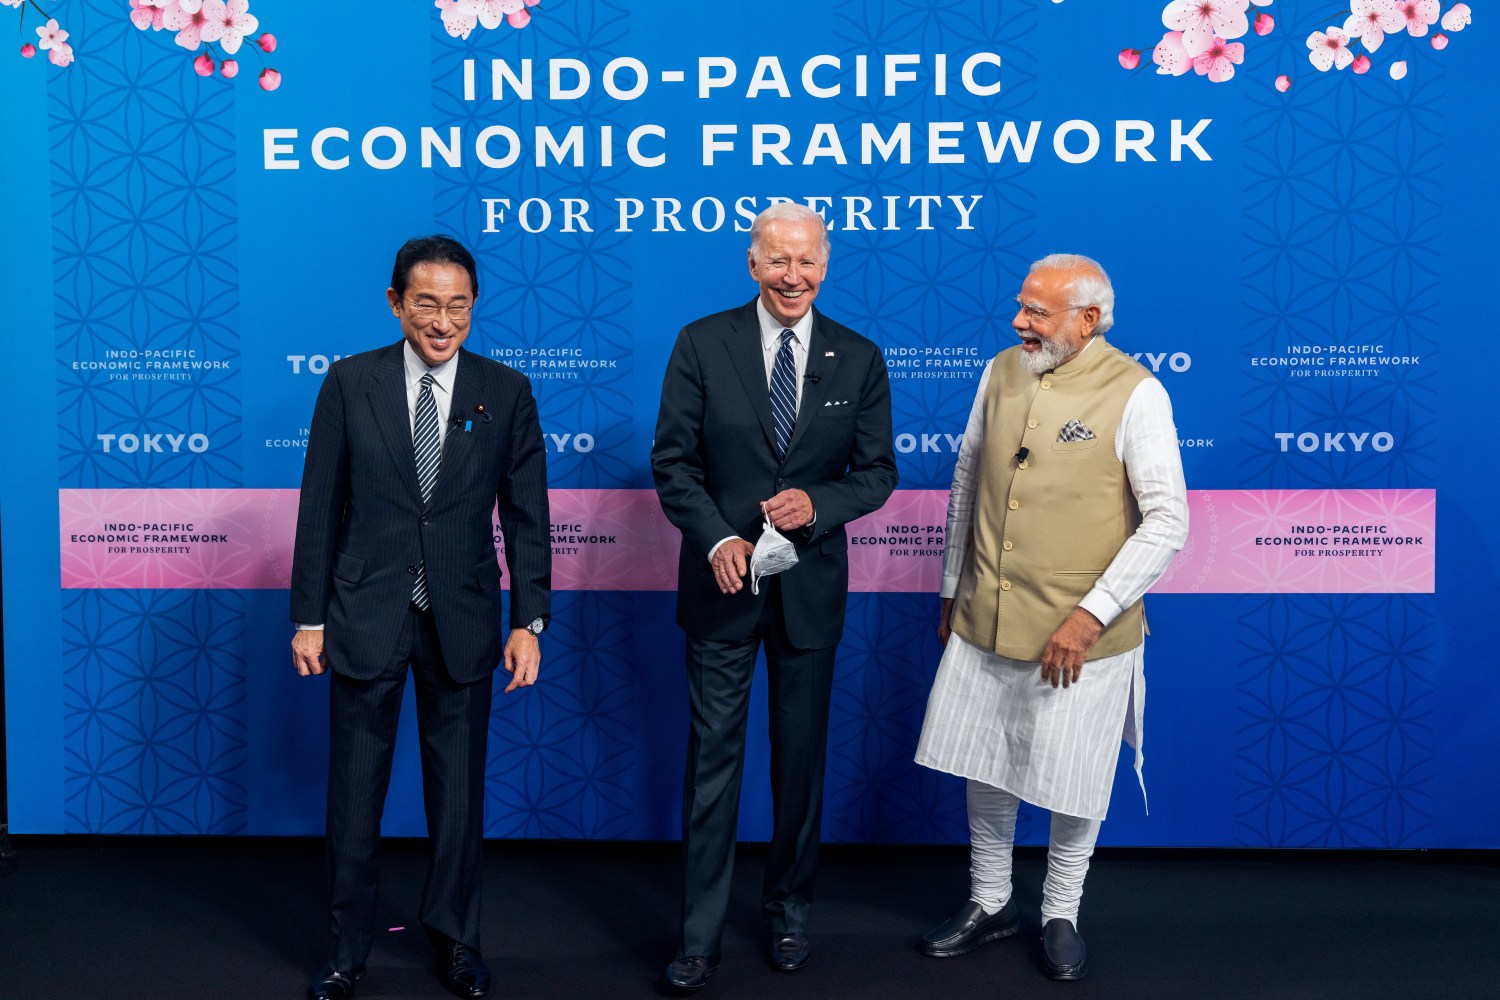 U.S. President Joe Biden poses with India Prime Minister Narendra Modi (left) and Japan Prime Minister Fumio Kishida as he announced the countries that are joining the new Indo-Pacific Economic Framework on Monday (May 23) during his visit to Tokyo. Biden launched his plan for U.S. economic engagement in Asia on Monday by initiating the new Indo-Pacific Economic Framework with 13 founding countries. Speaking at the launch event in Tokyo, Biden said that the future of the 21st Century economy will be written in the Indo-Pacific. The 13 initial members of the group, the Indo-Pacific Economic Framework (IPEF), are the U.S., Japan, India, South Korea, Australia, Indonesia, Thailand, Singapore, Malaysia, the Philippines, Vietnam, New Zealand and Brunei, the Biden administration said Monday. The members accounting for about 40% of the world's gross domestic product.